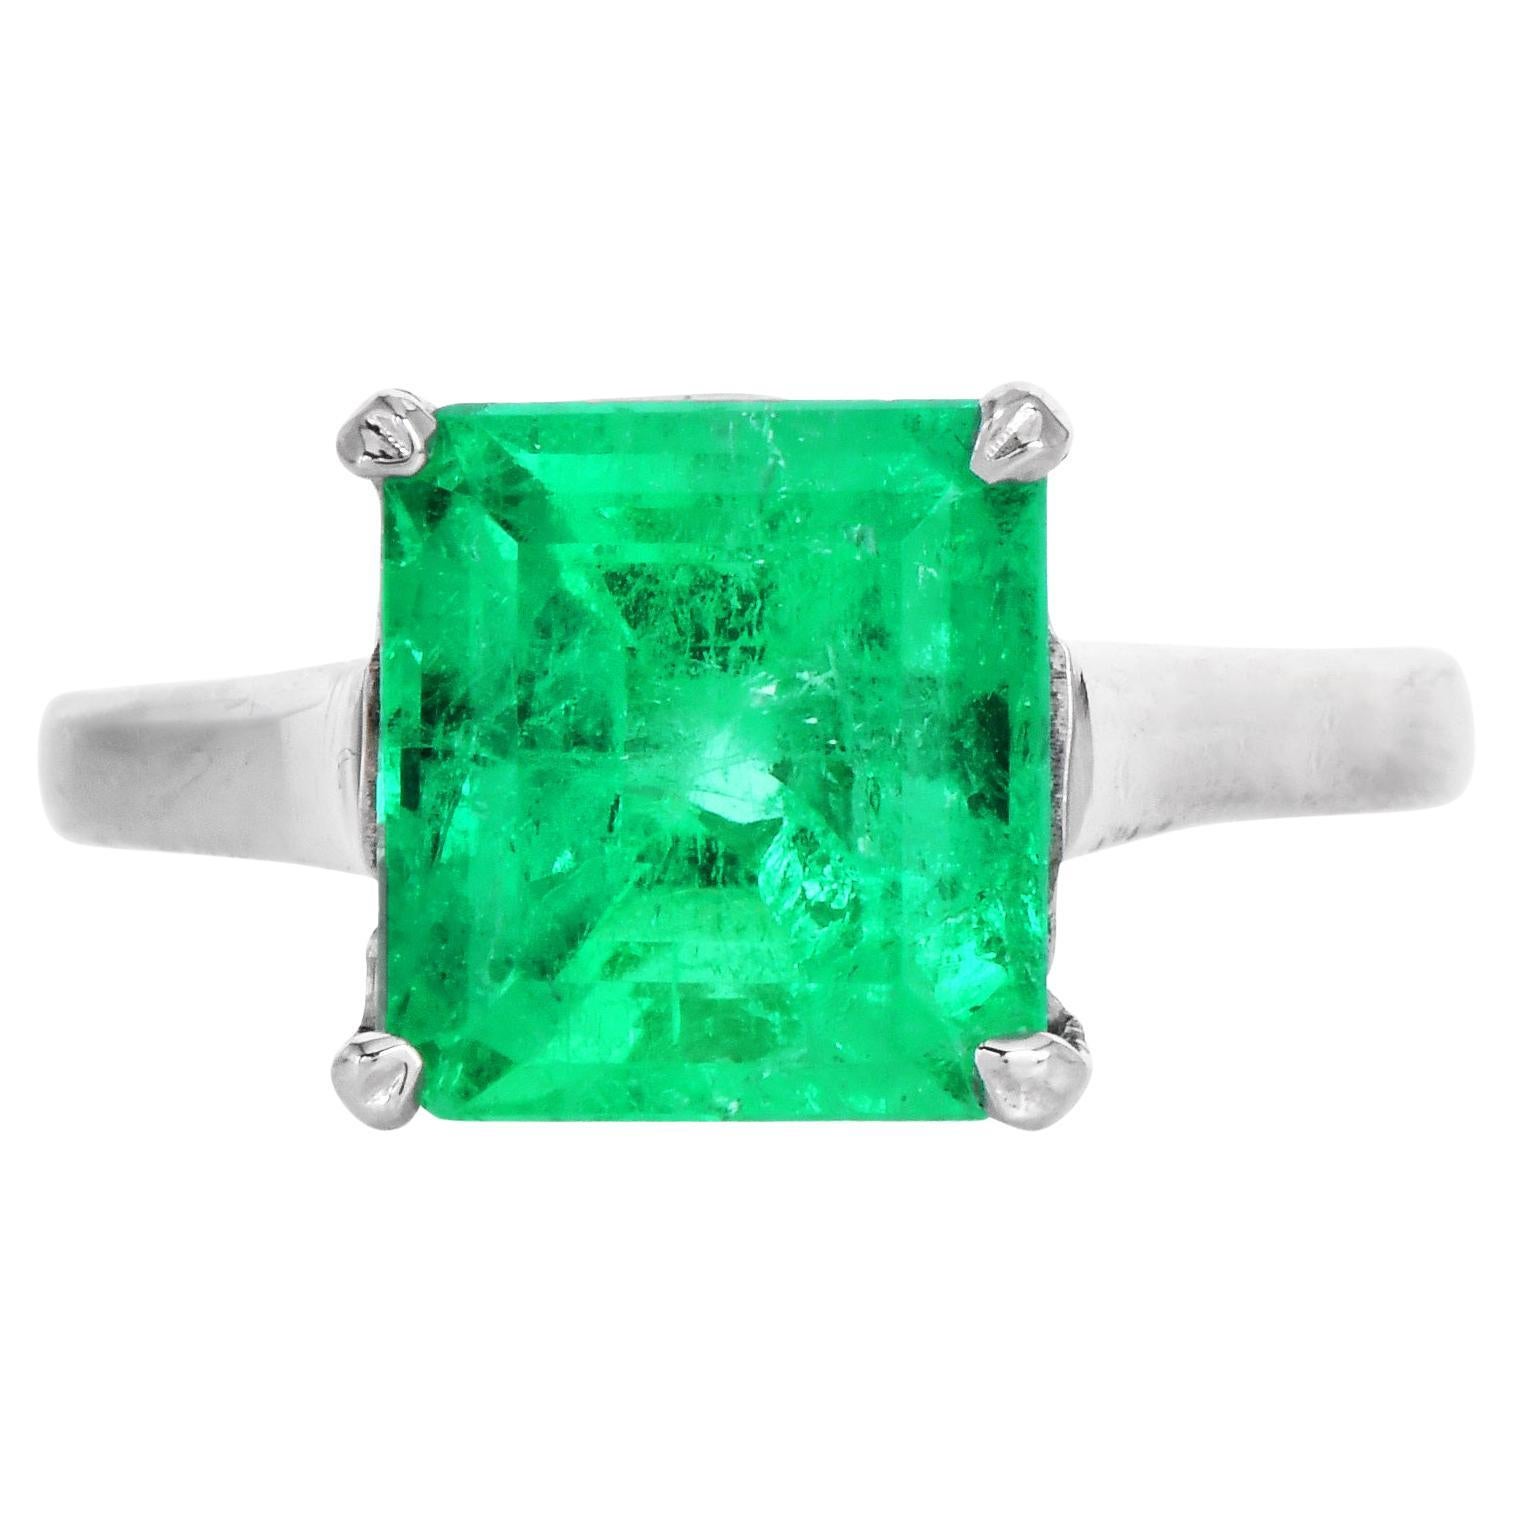 This classic Emerald Solitaire ring is crafted in solid 14k gold. It is exposed at the center with fine Assher-cut genuine Colombian Emerald, GIA certified, weighing 4.62 carats measuring approx: 10.04 x 9.30 x 7.54mm; set in a tiffant style four